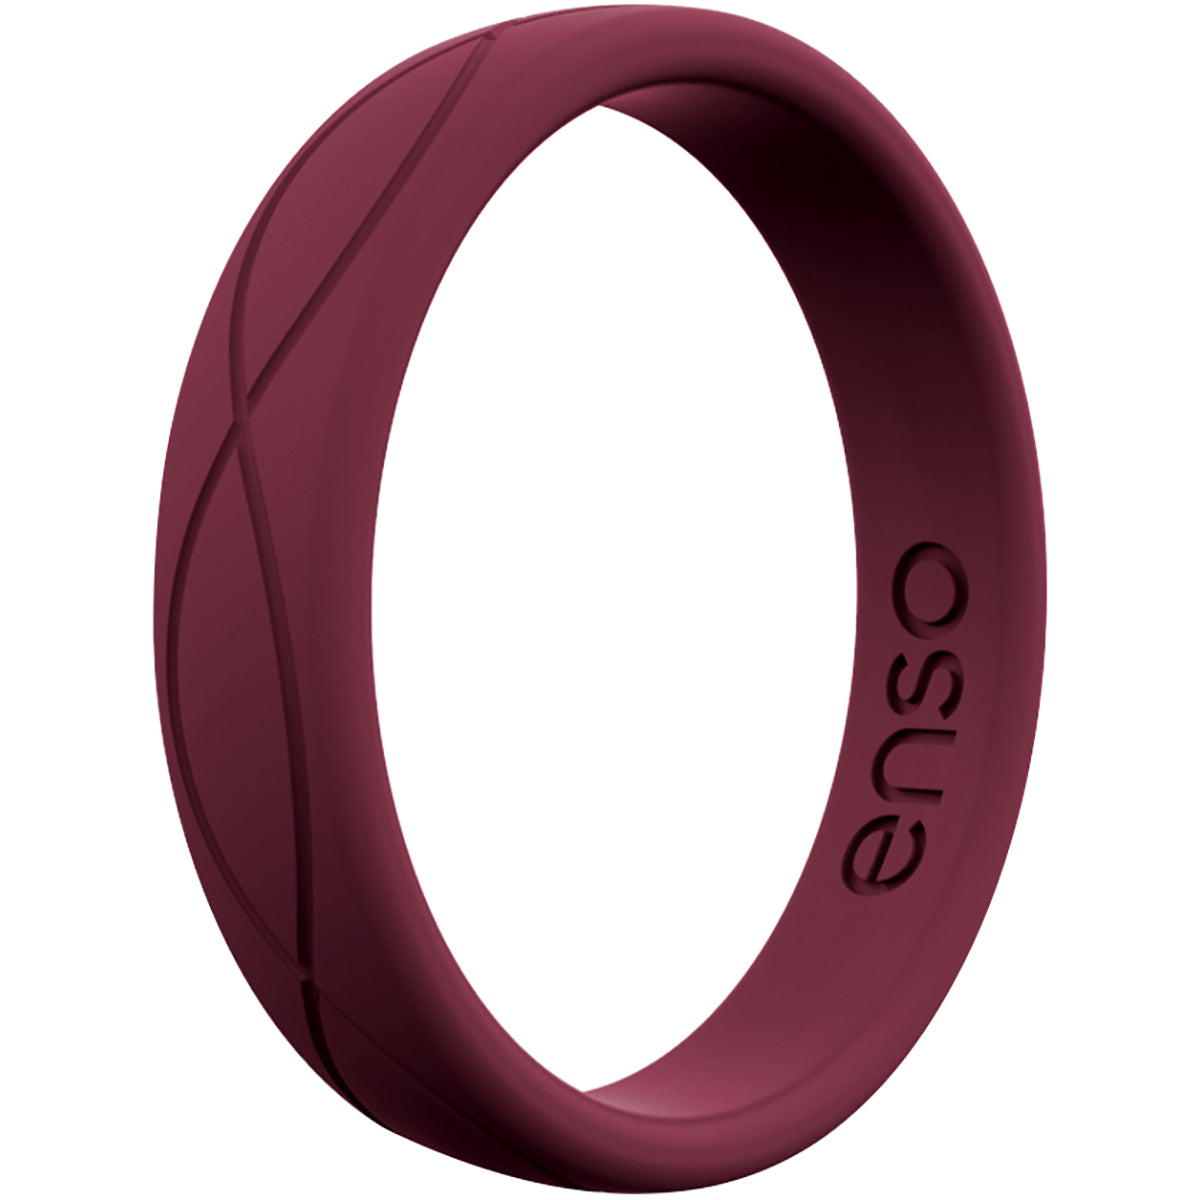 Enso Rings Women's Infinity Series Silicone Ring - Oxblood Enso Rings